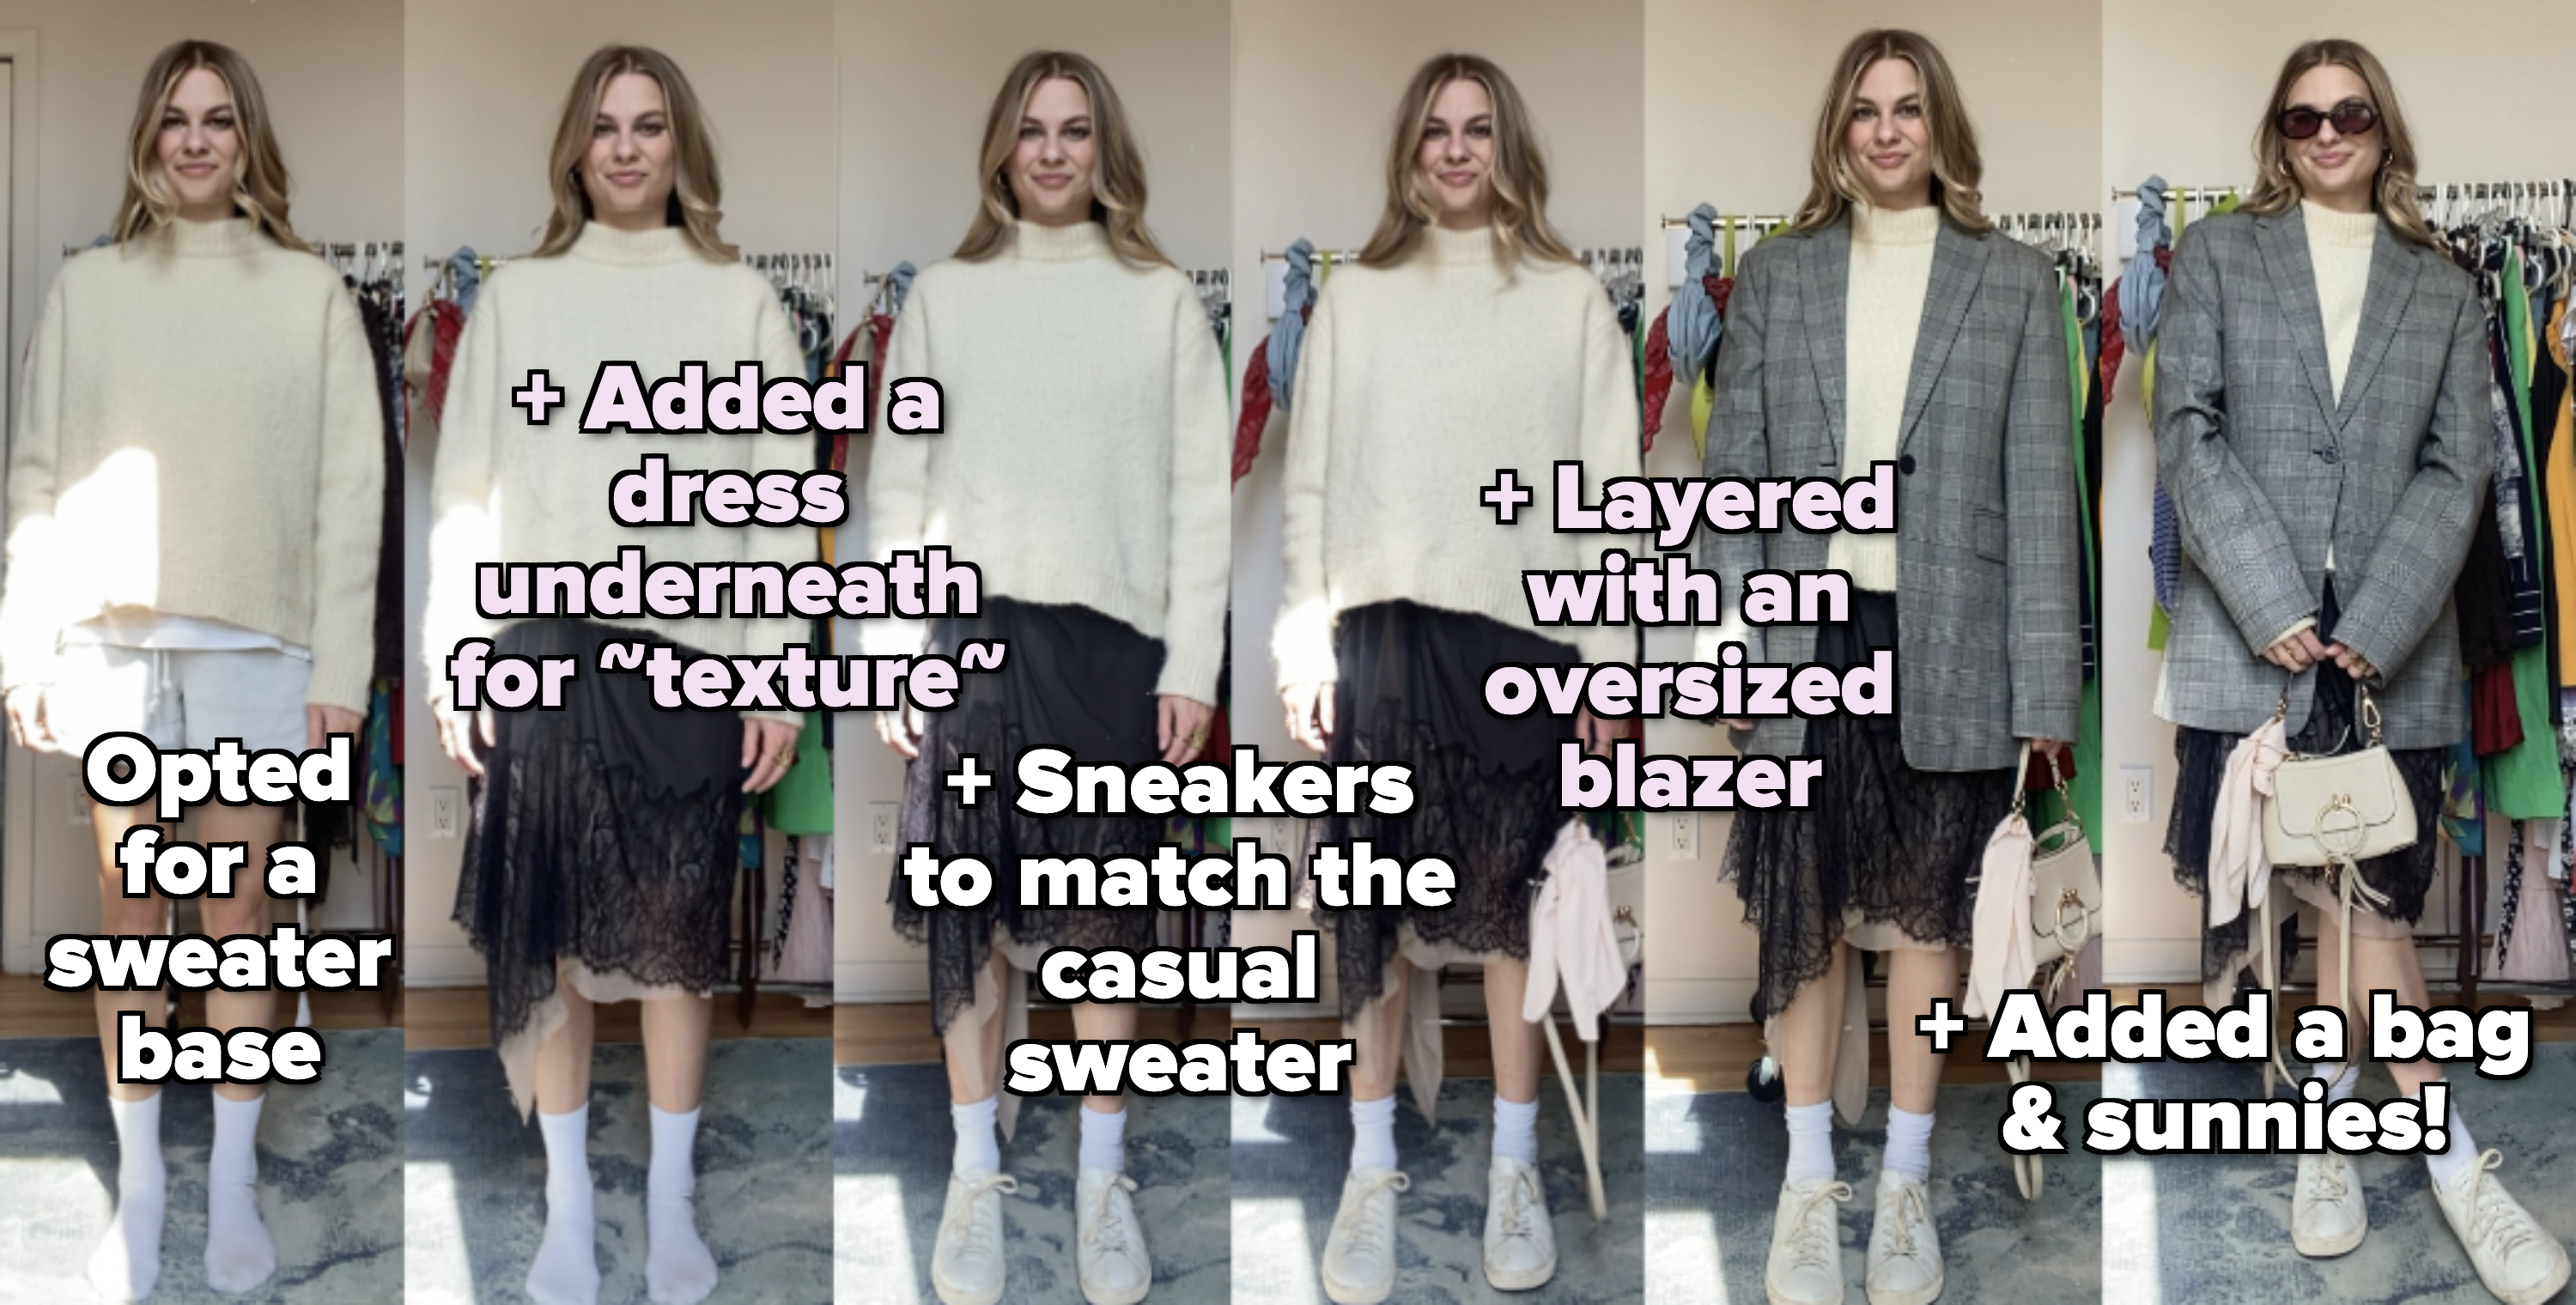 Me deconstructing how I styled the outfit by mismatching a sweater, blazer, dressy skirt, and sneakers